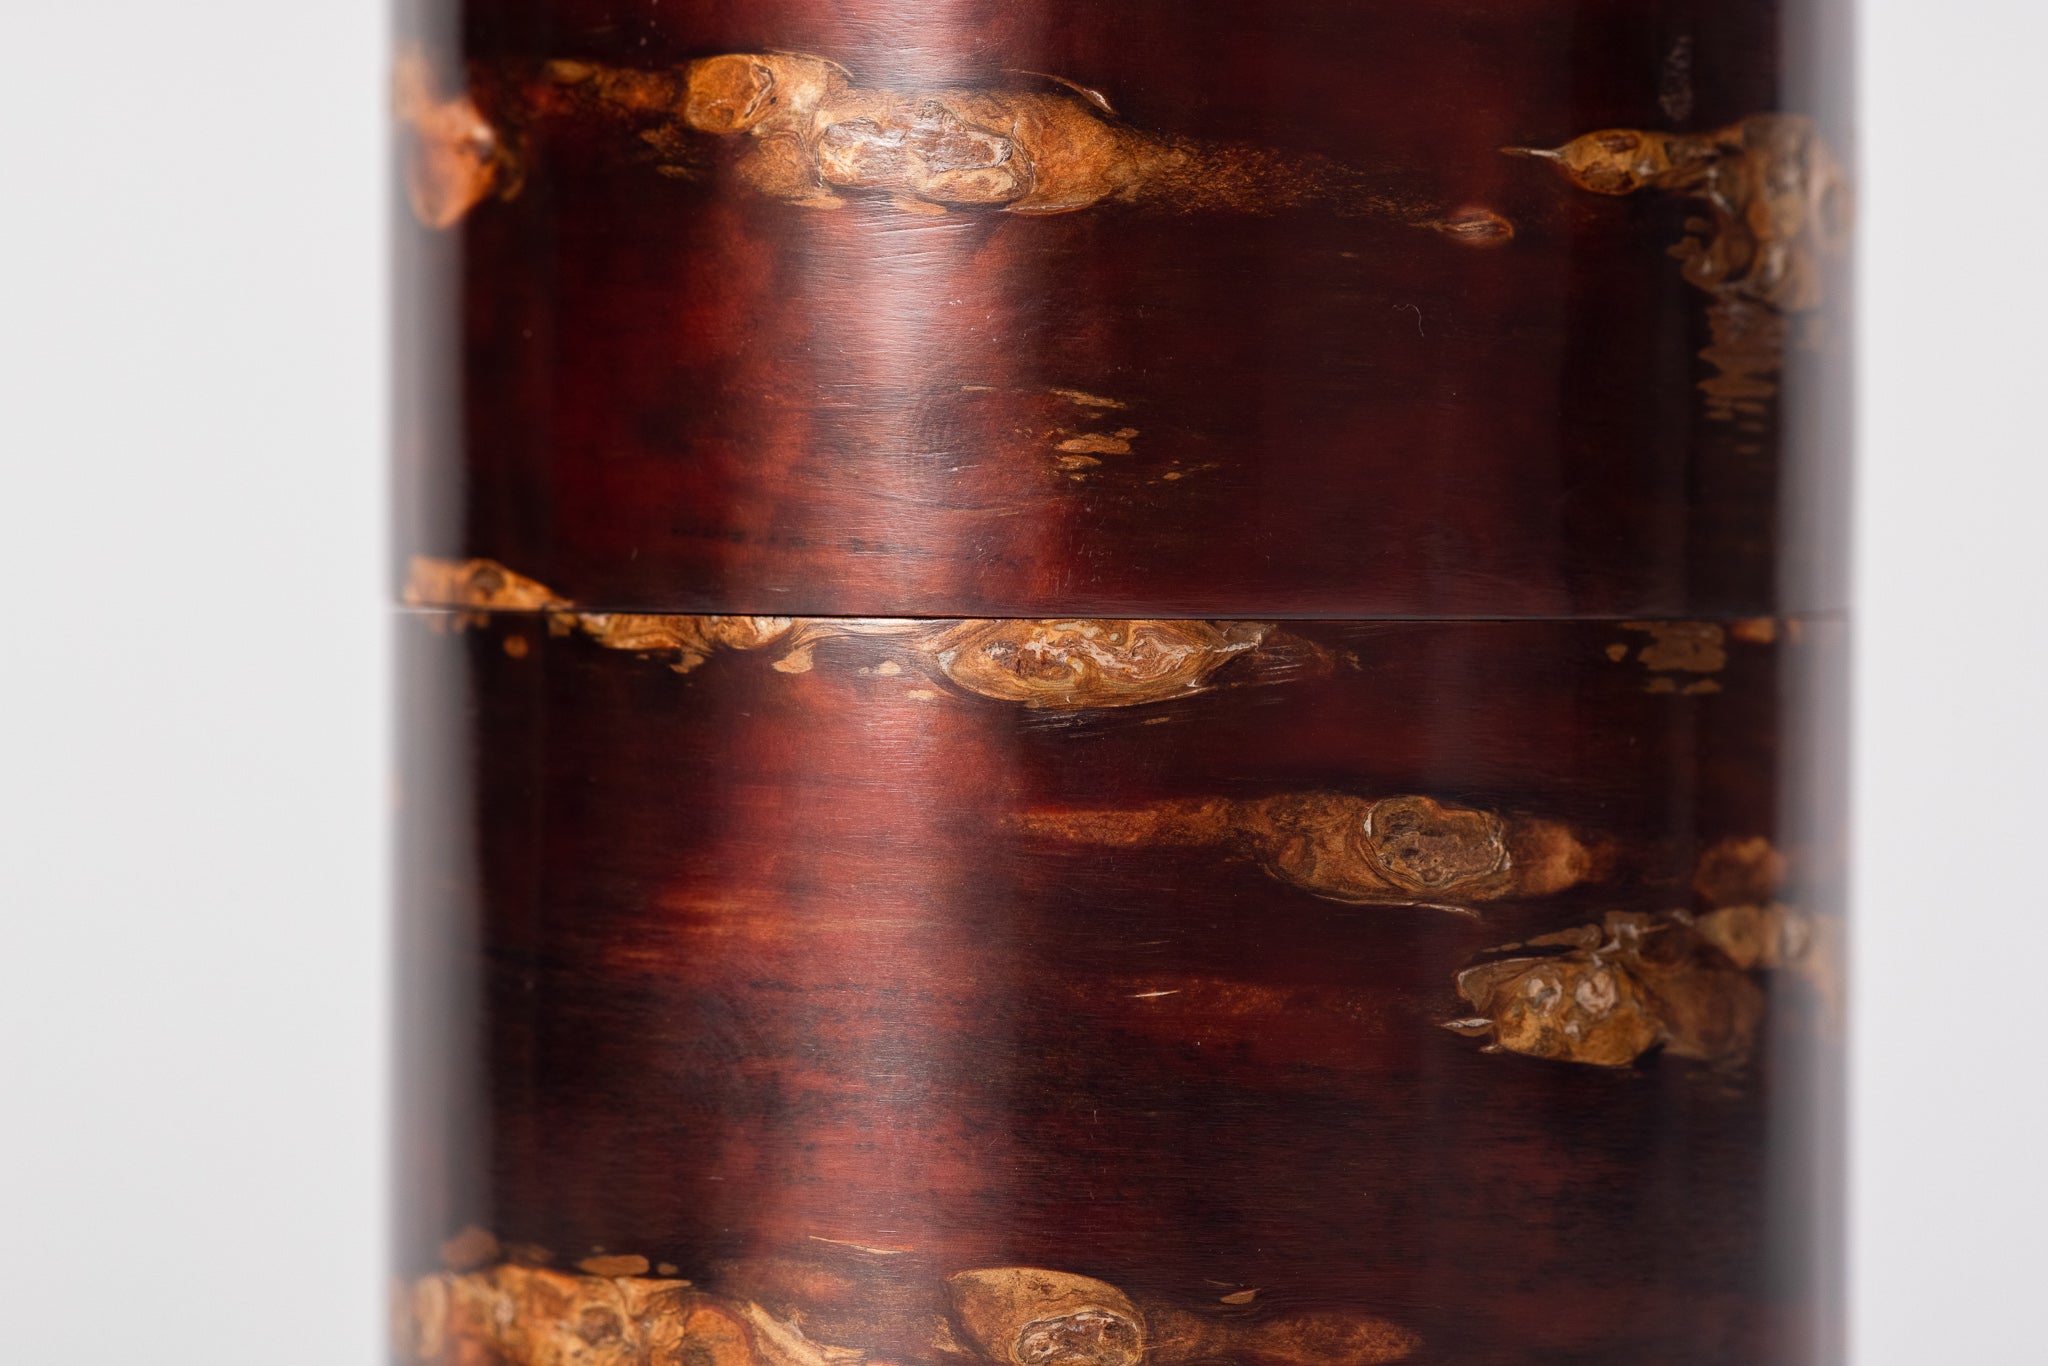 A close-up of a cylindrical tea caddy made of cherry bark sits on a white background.  The cherry bark is visible up-close and has a natural red and orange striped pattern. It is polished and very shiny.